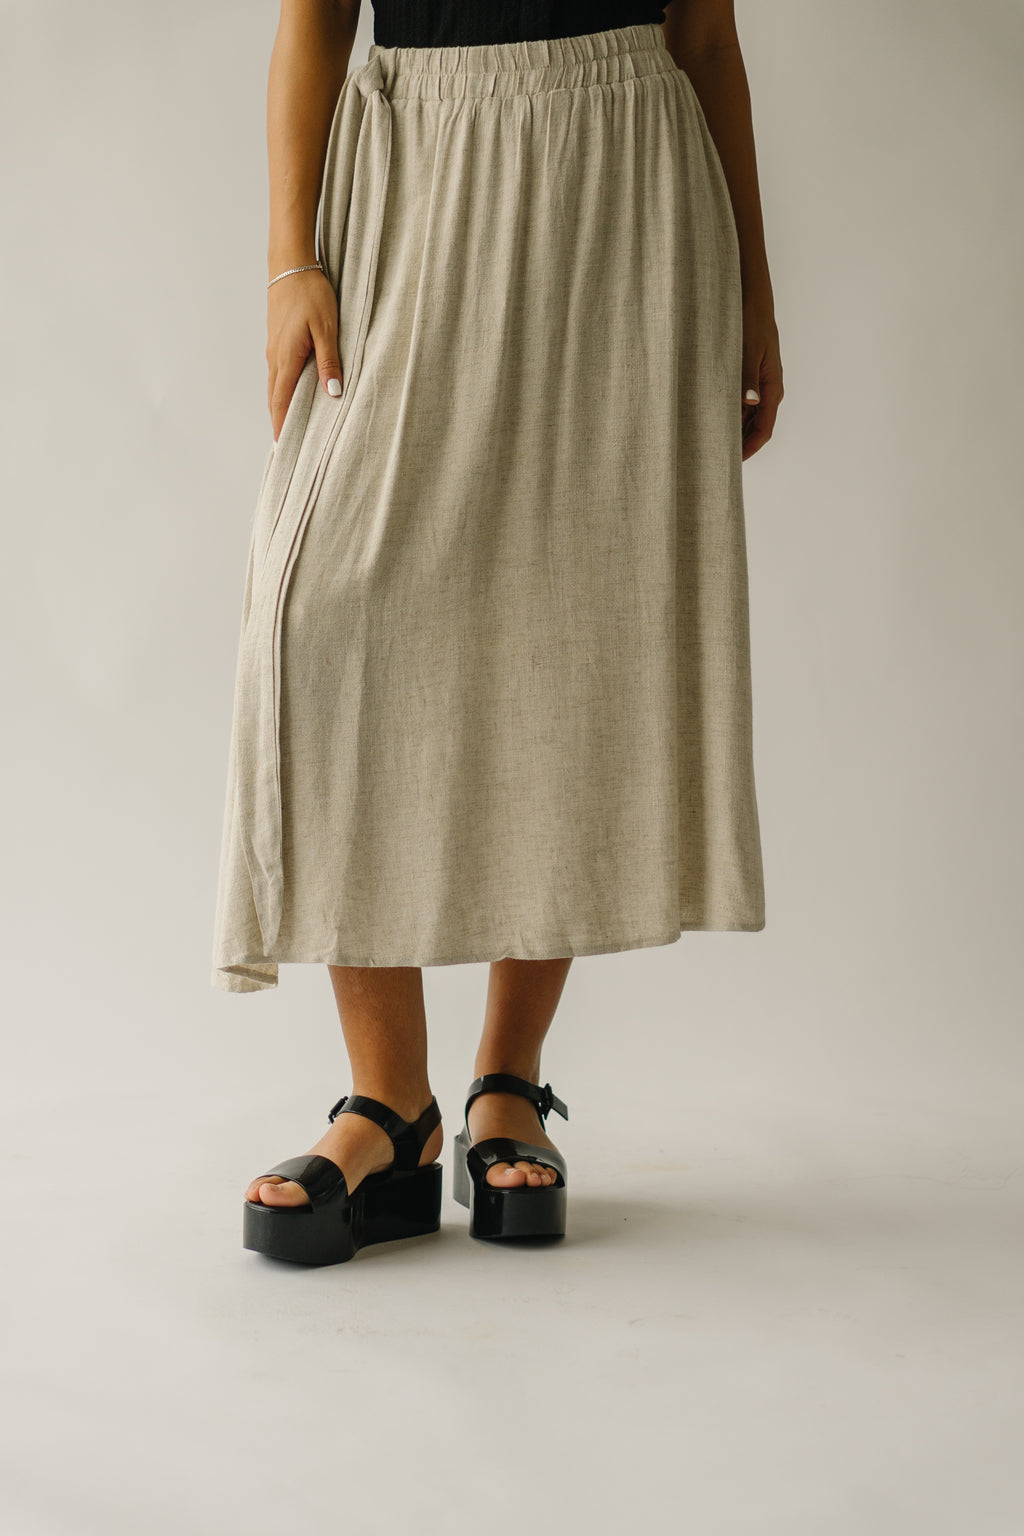 Sale Items | Piper & Scoot Boutique Modest Clothing